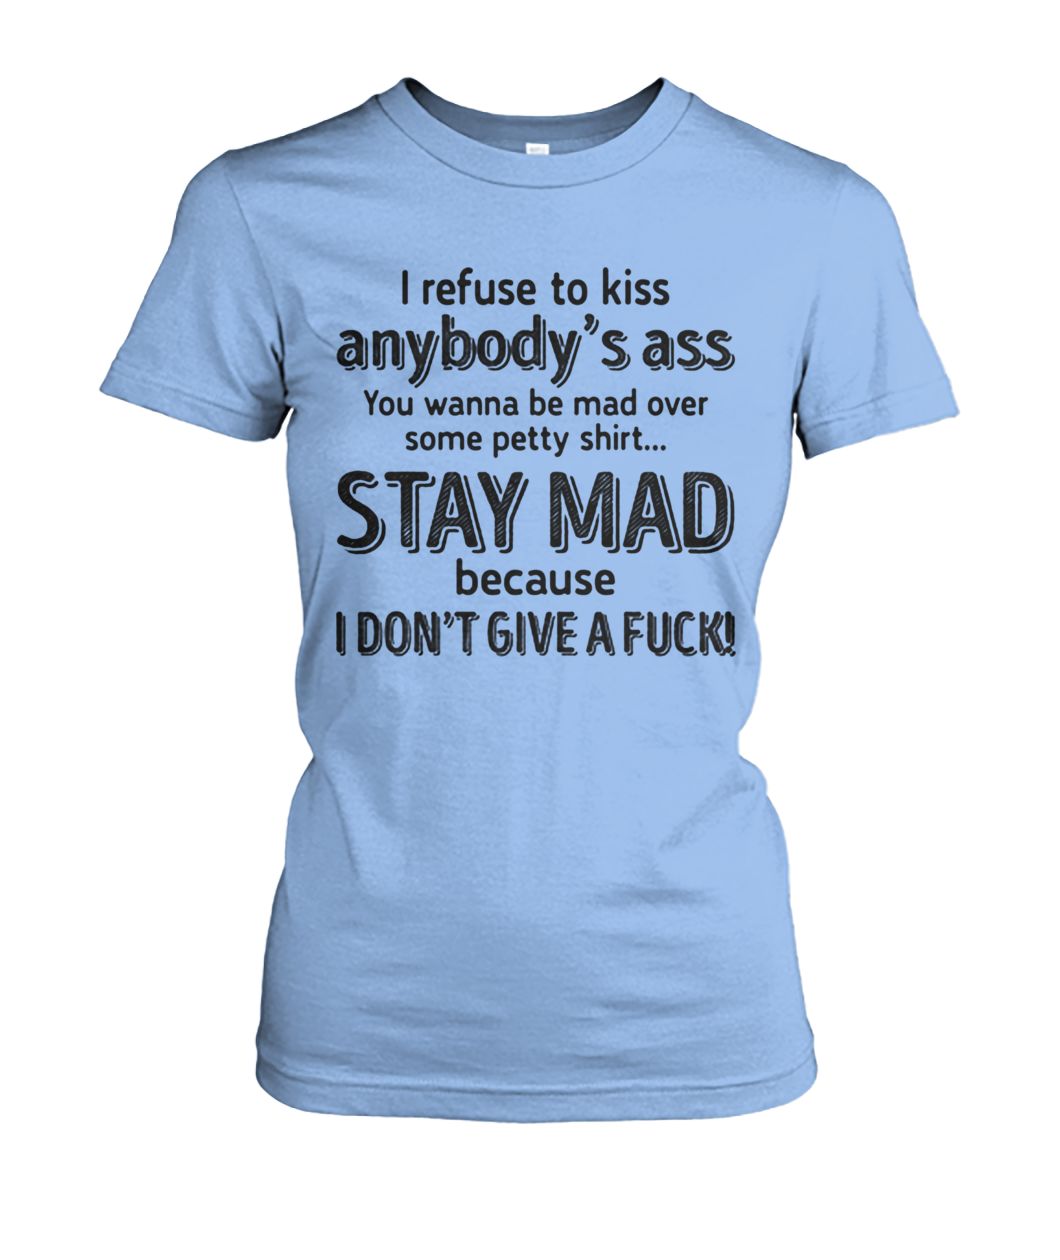 I refuse to kiss anybody's ass you wanna be mad over some petty shit stay mad women's crew tee